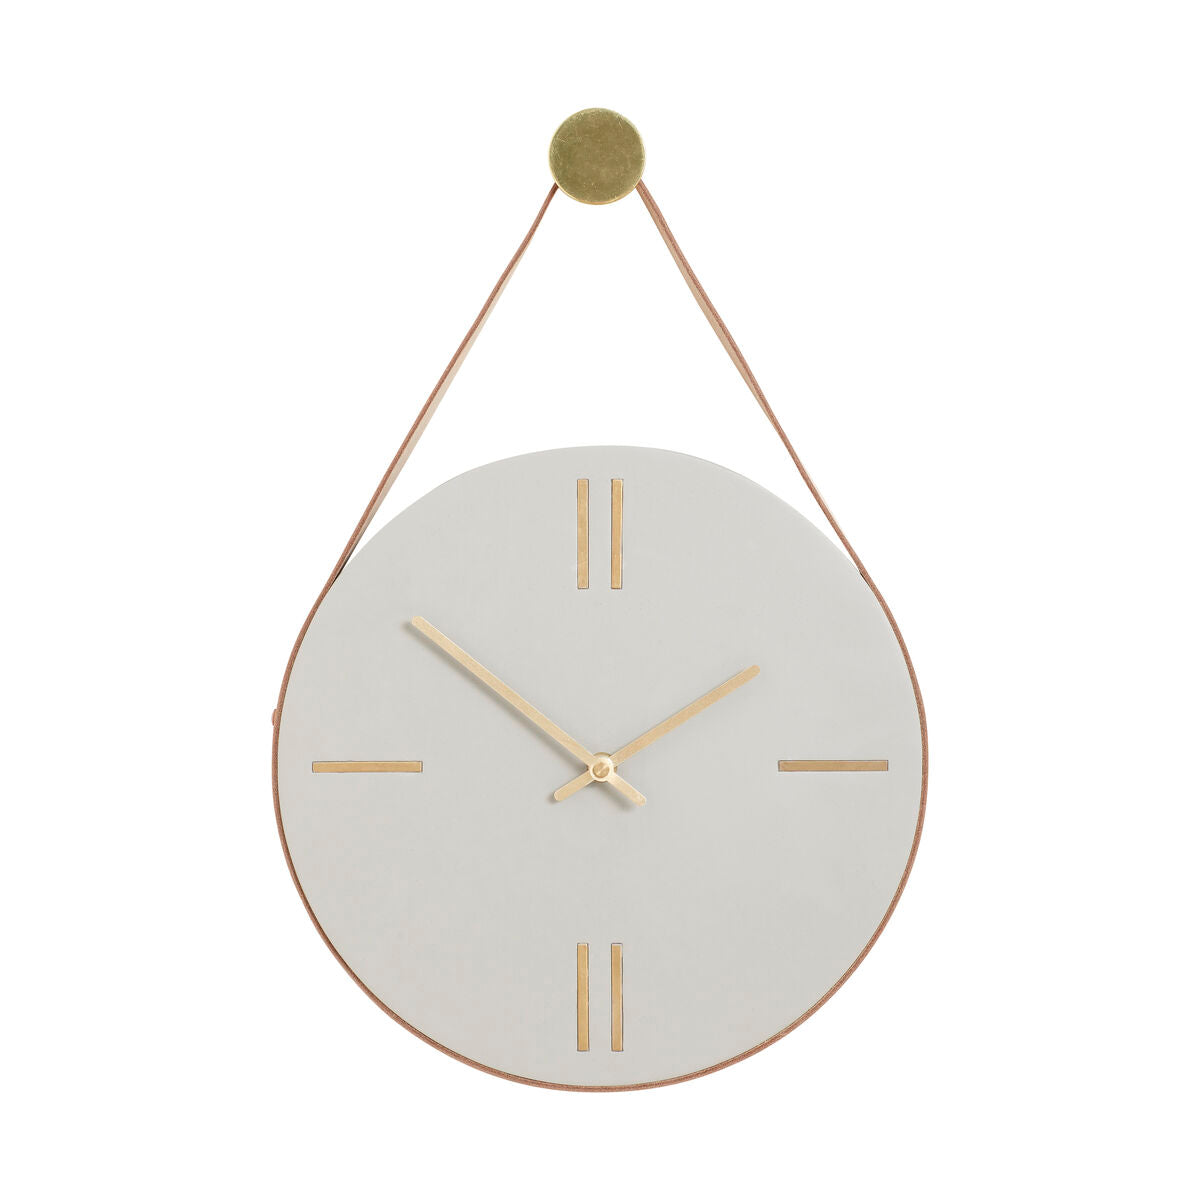 Drop is a unique clock that will perfectly fit into the interior in a modern, Scandinavian and eclectic style. It owes its minimalist appearance to a concrete shield on which there is no dial. Finishing brass tips emphasizes its elegant and timeless character. Attaching the leather strap allows convenient suspension in any home and commercial space.